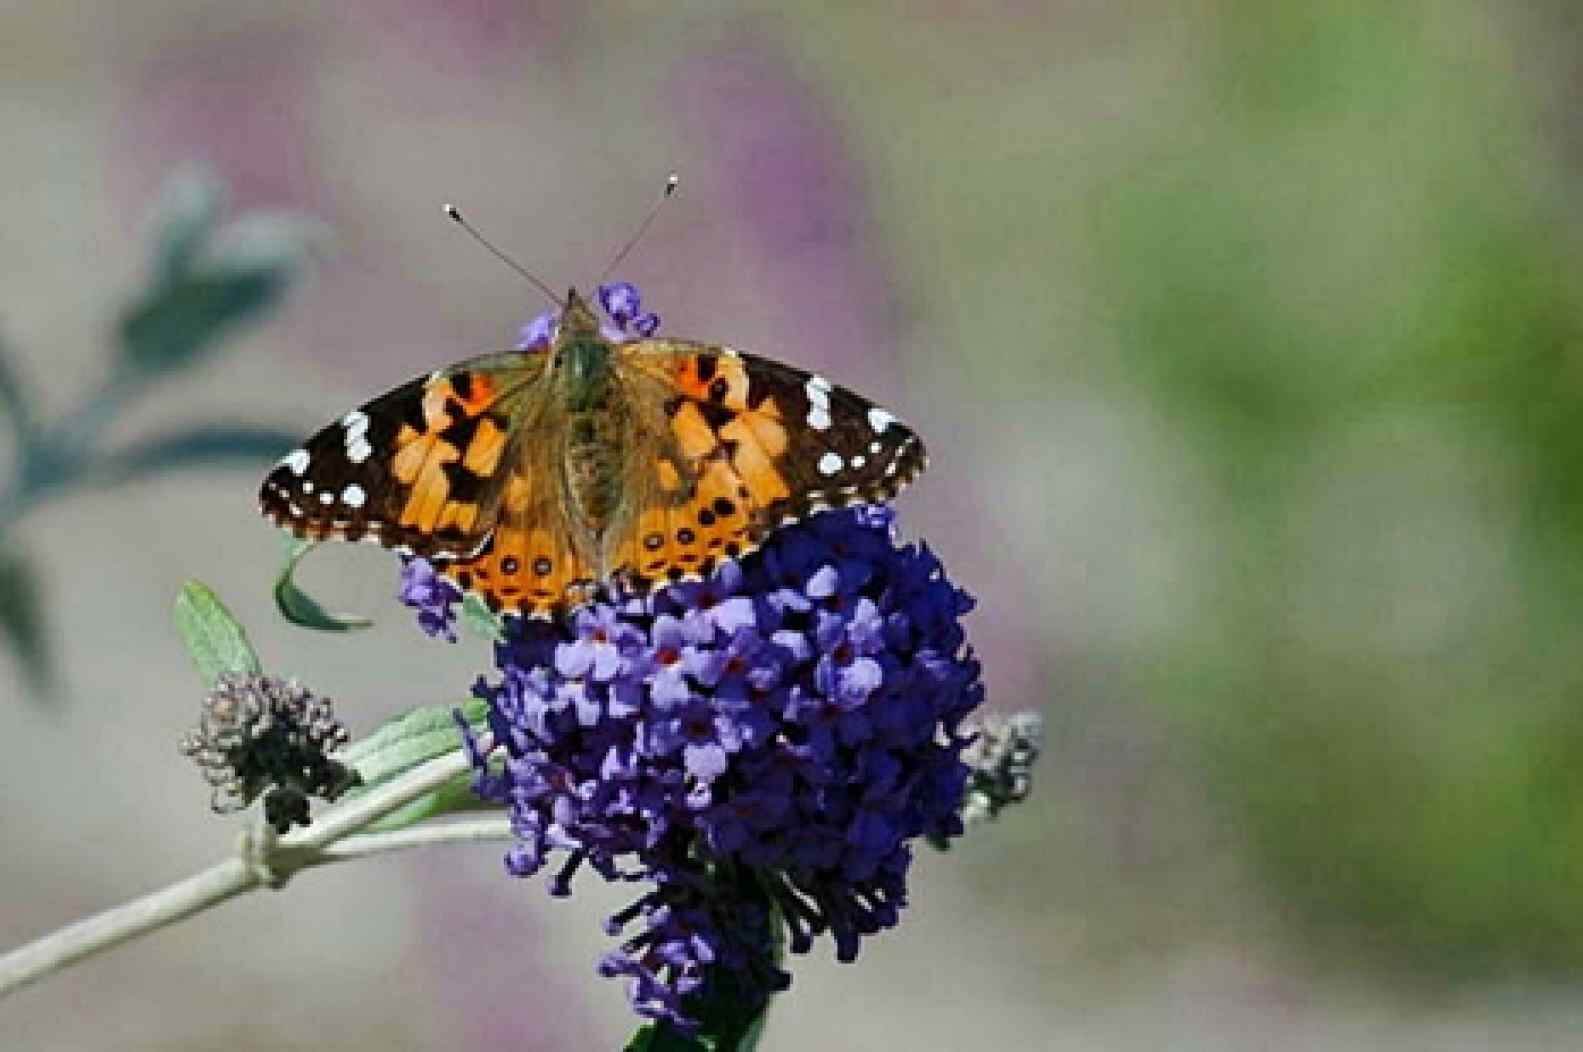 Painted Lady Butterfly on Buddleia